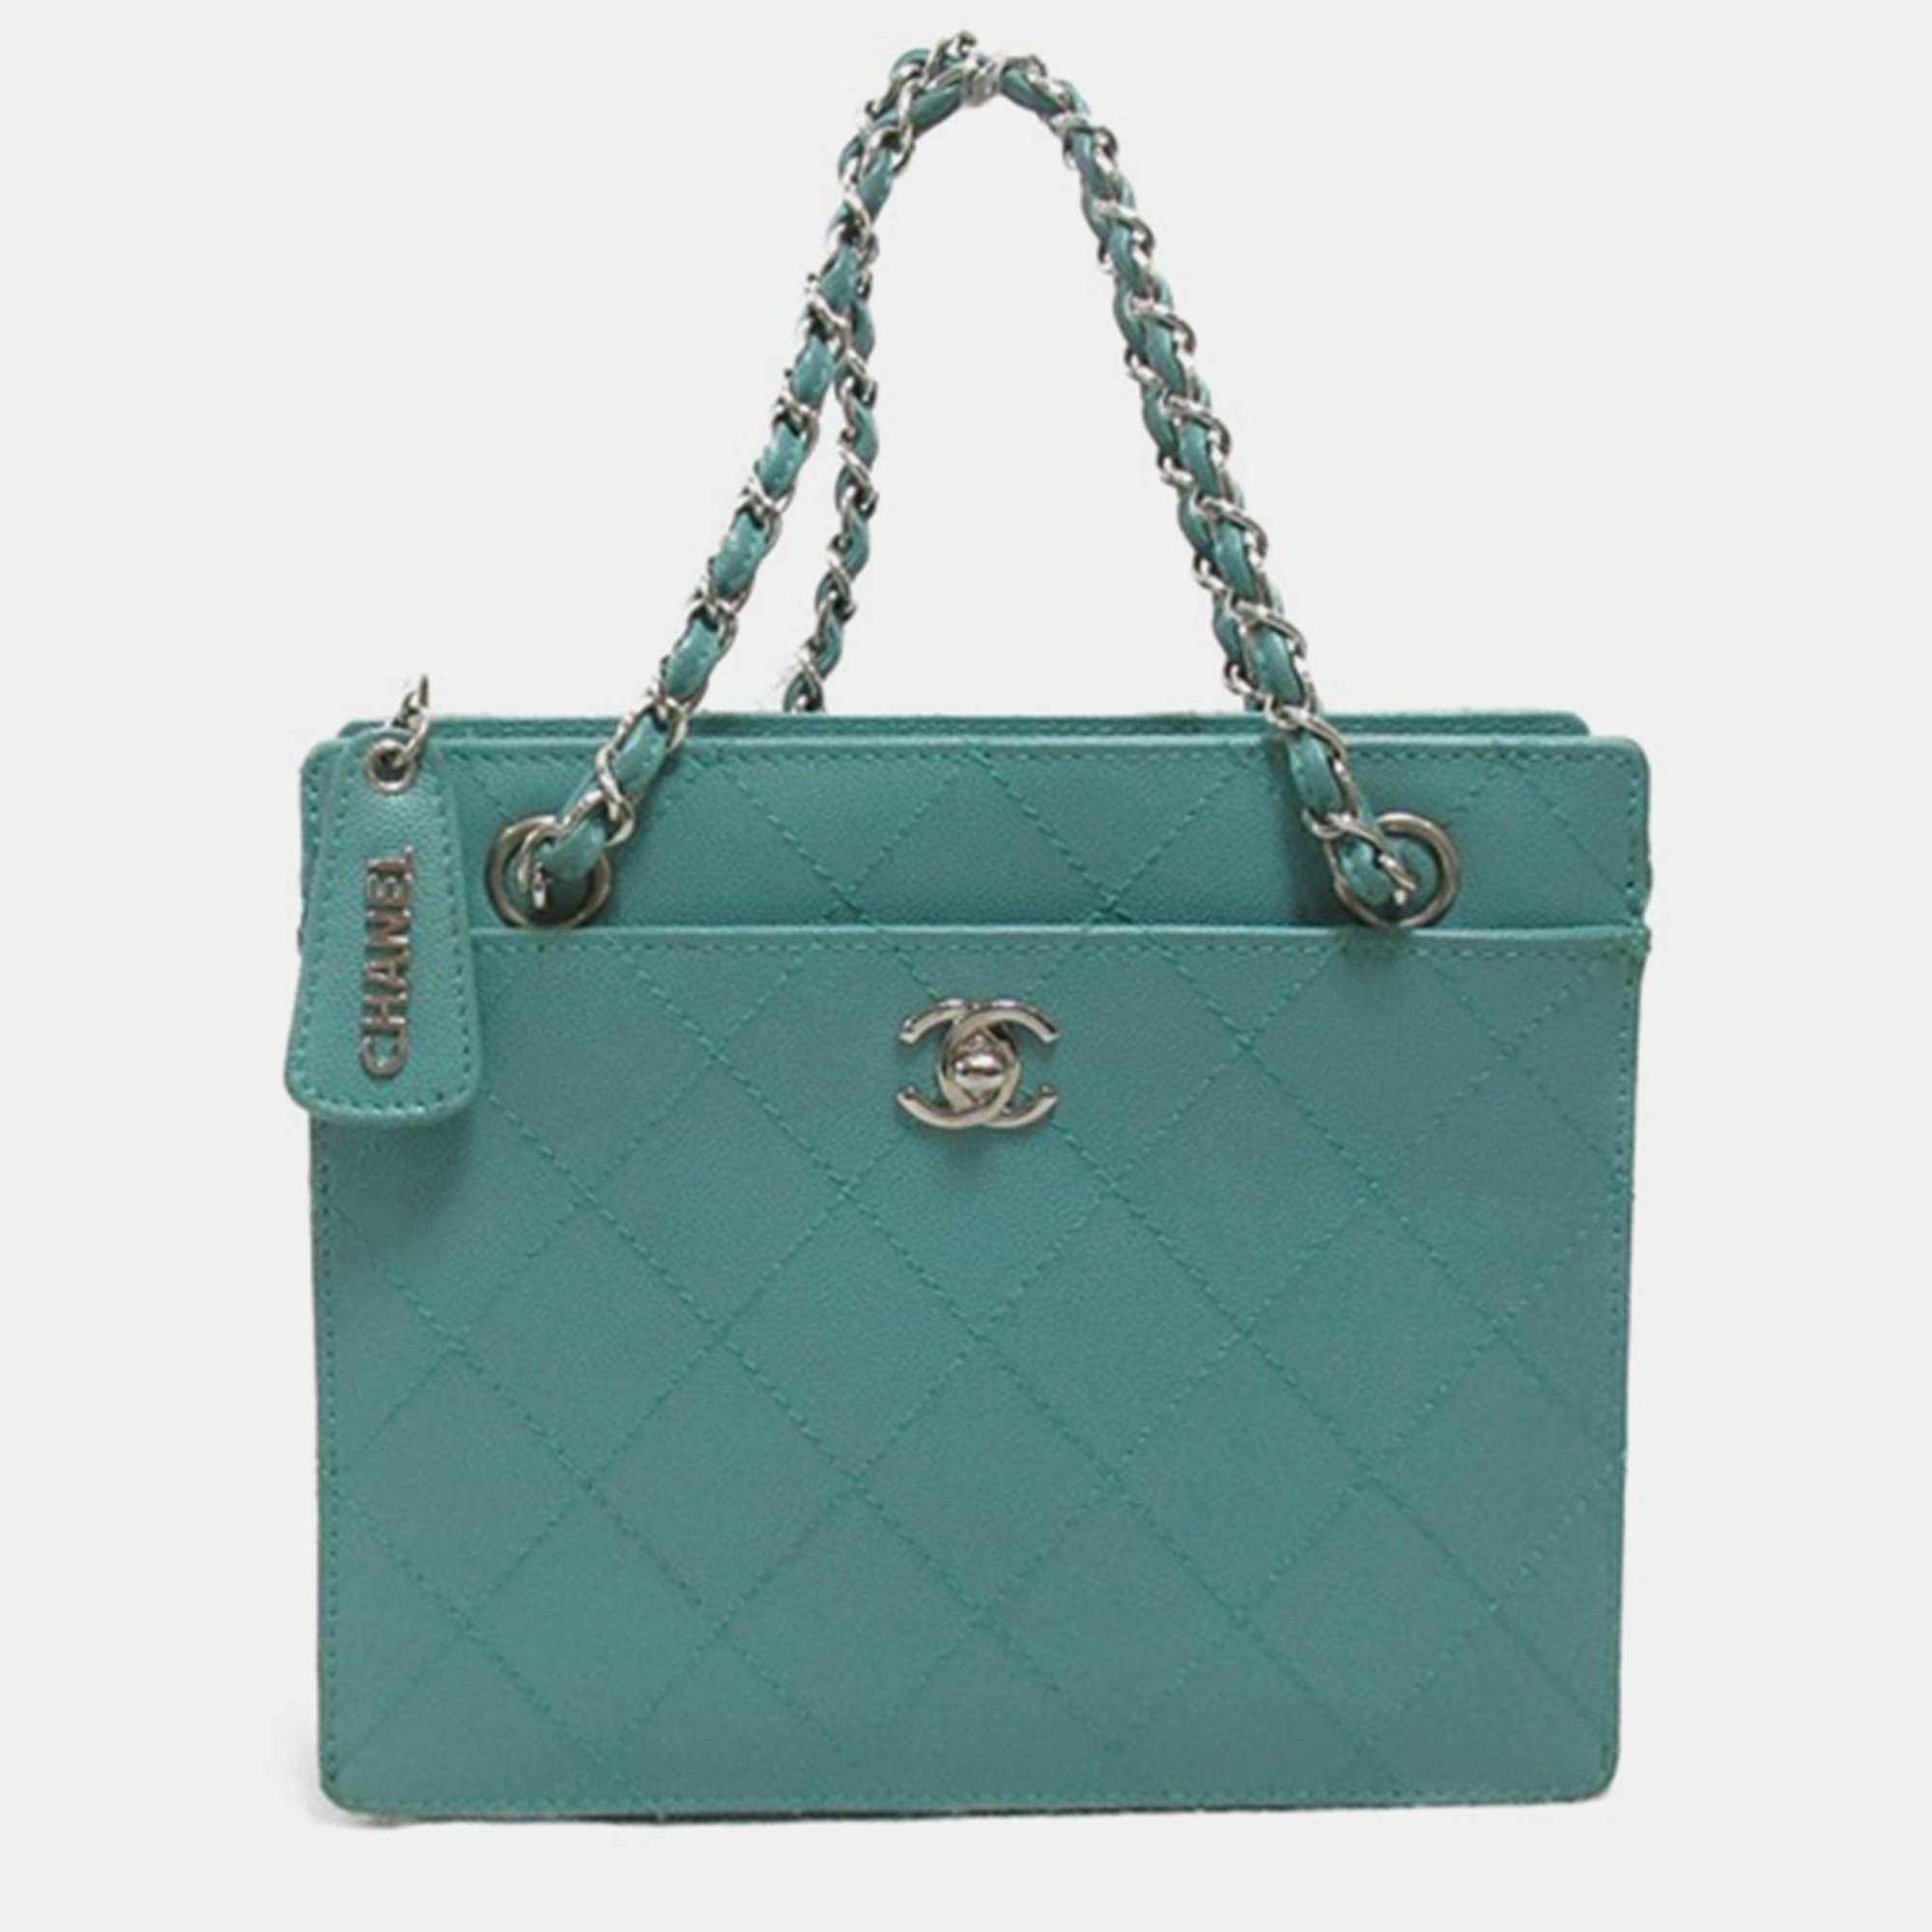 Chanel green leather quilted caviar chain handbag